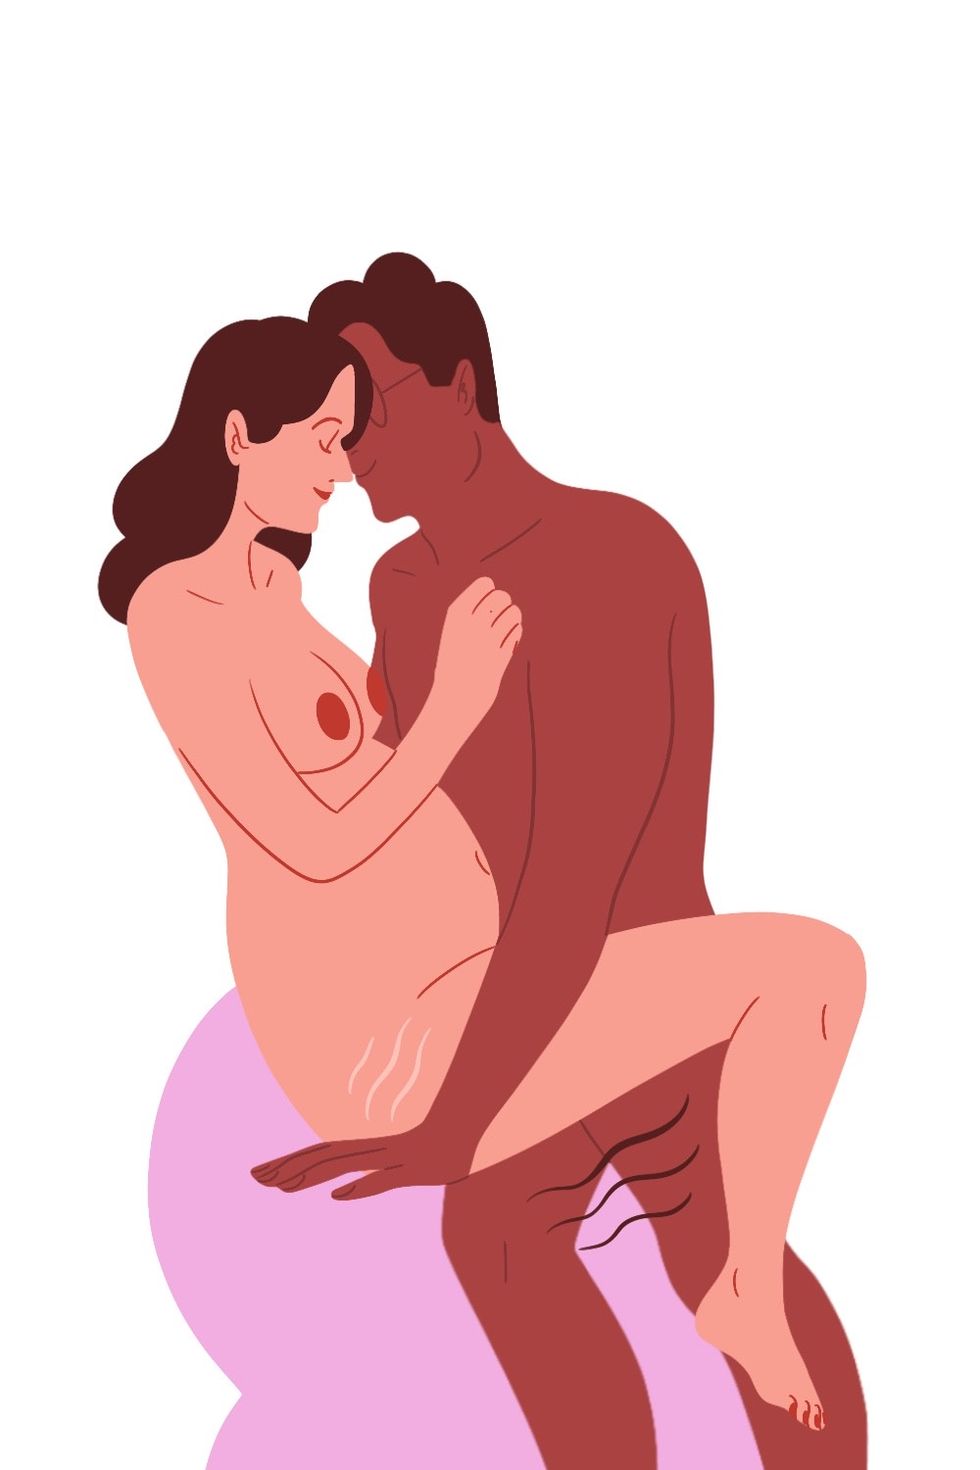 Prego Sex Positions - 22 Pregnancy Sex Positions - How to Have Safe Sex While Pregnant